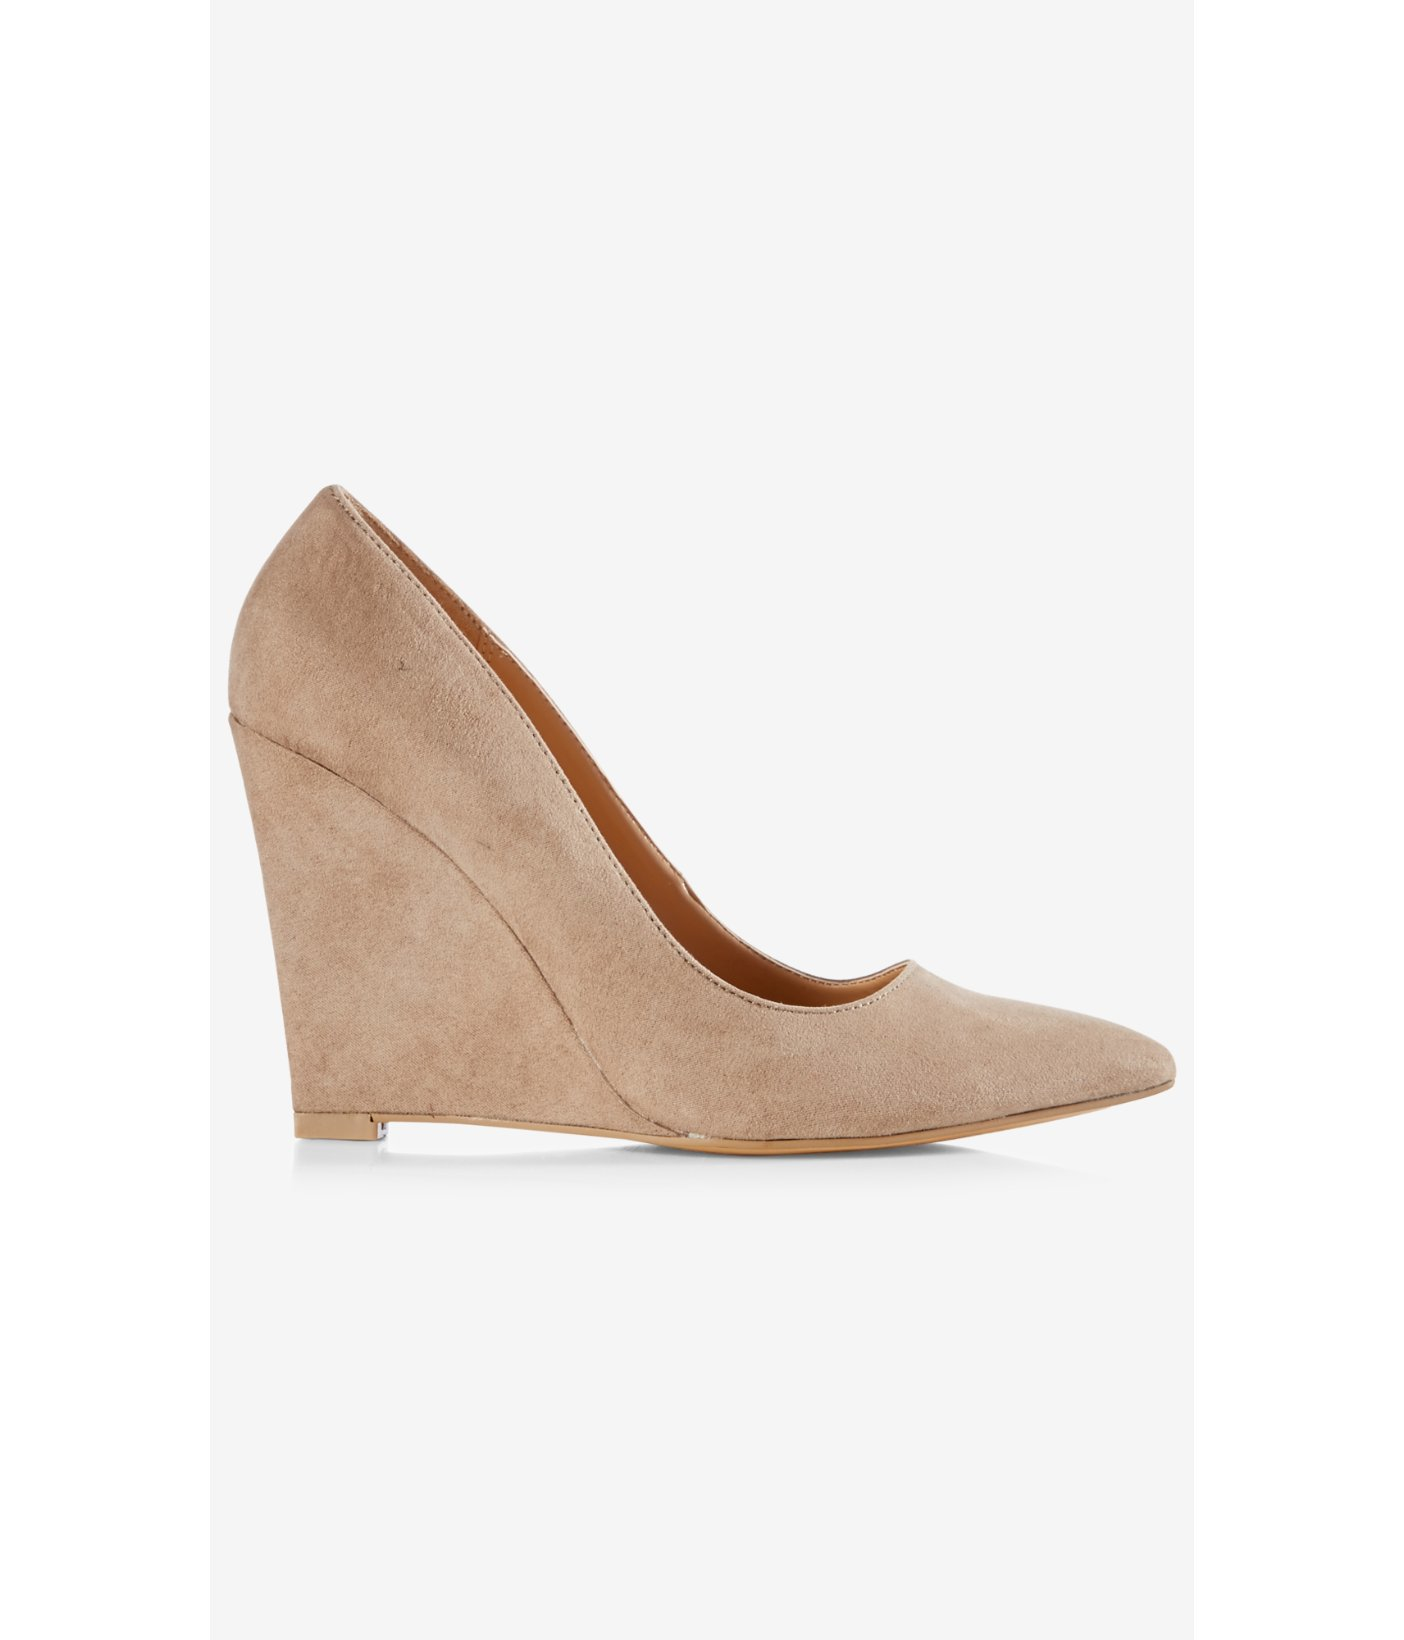 pointed toe wedge shoes